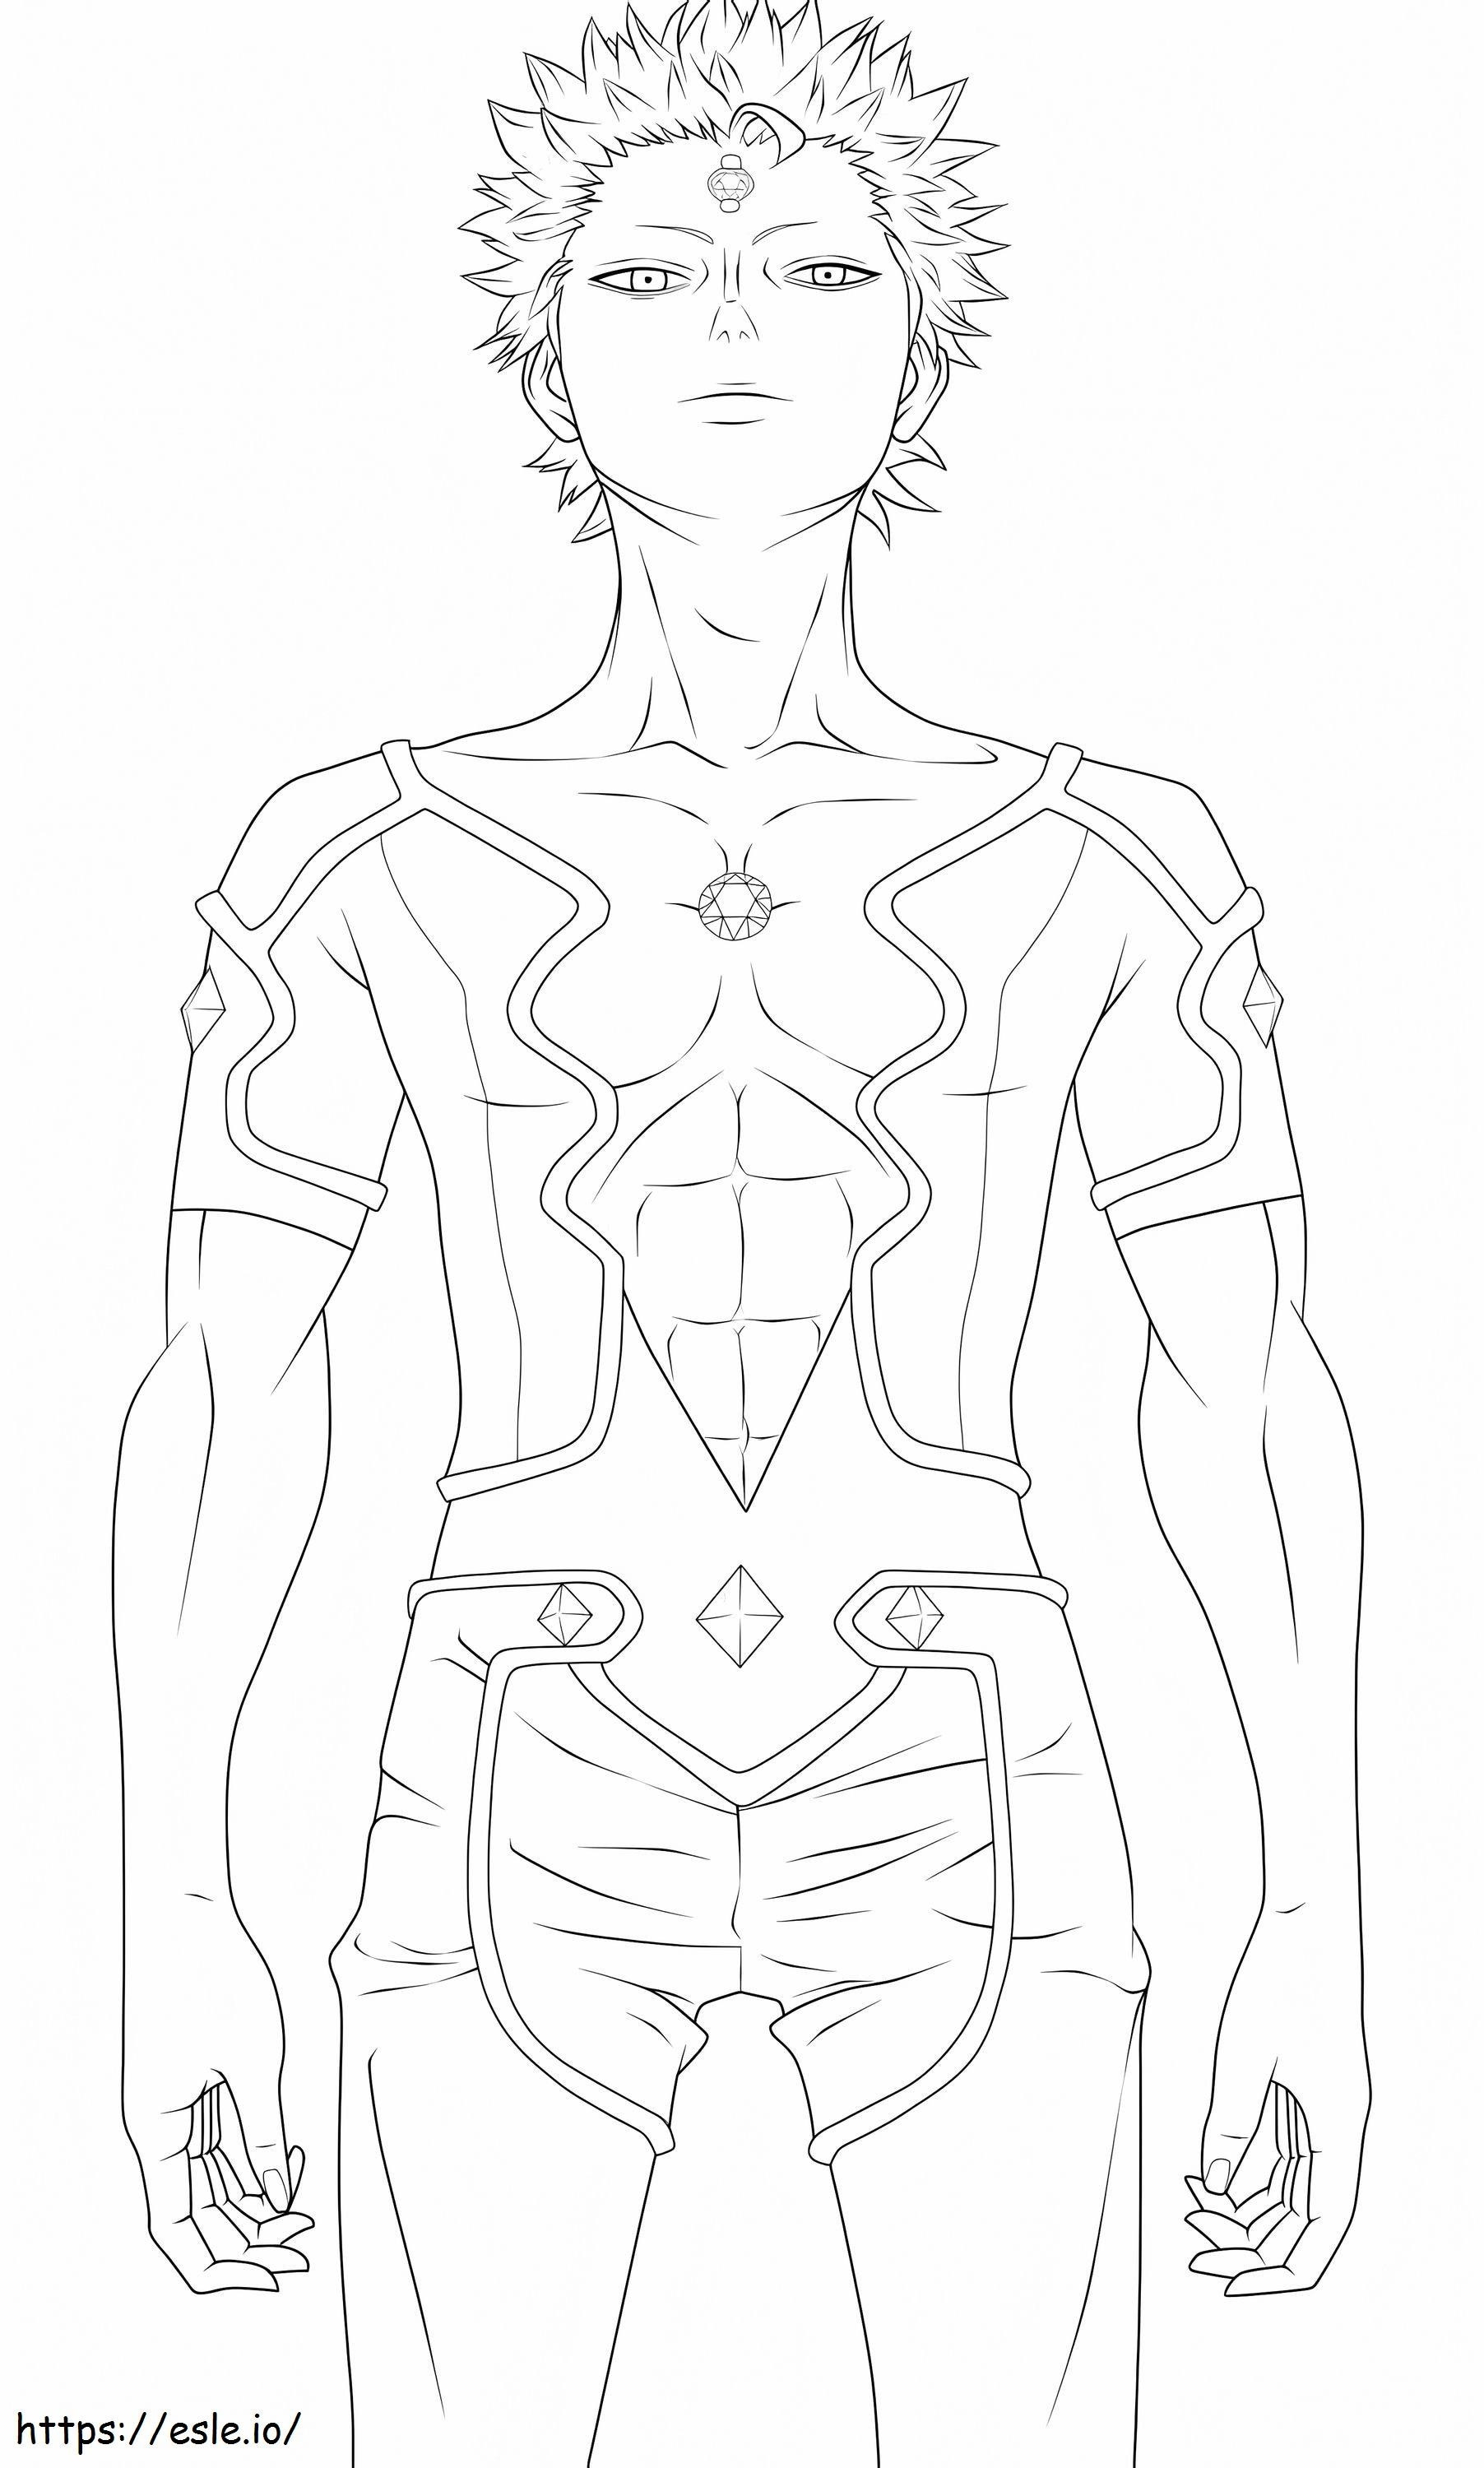 Mars From Black Clover coloring page